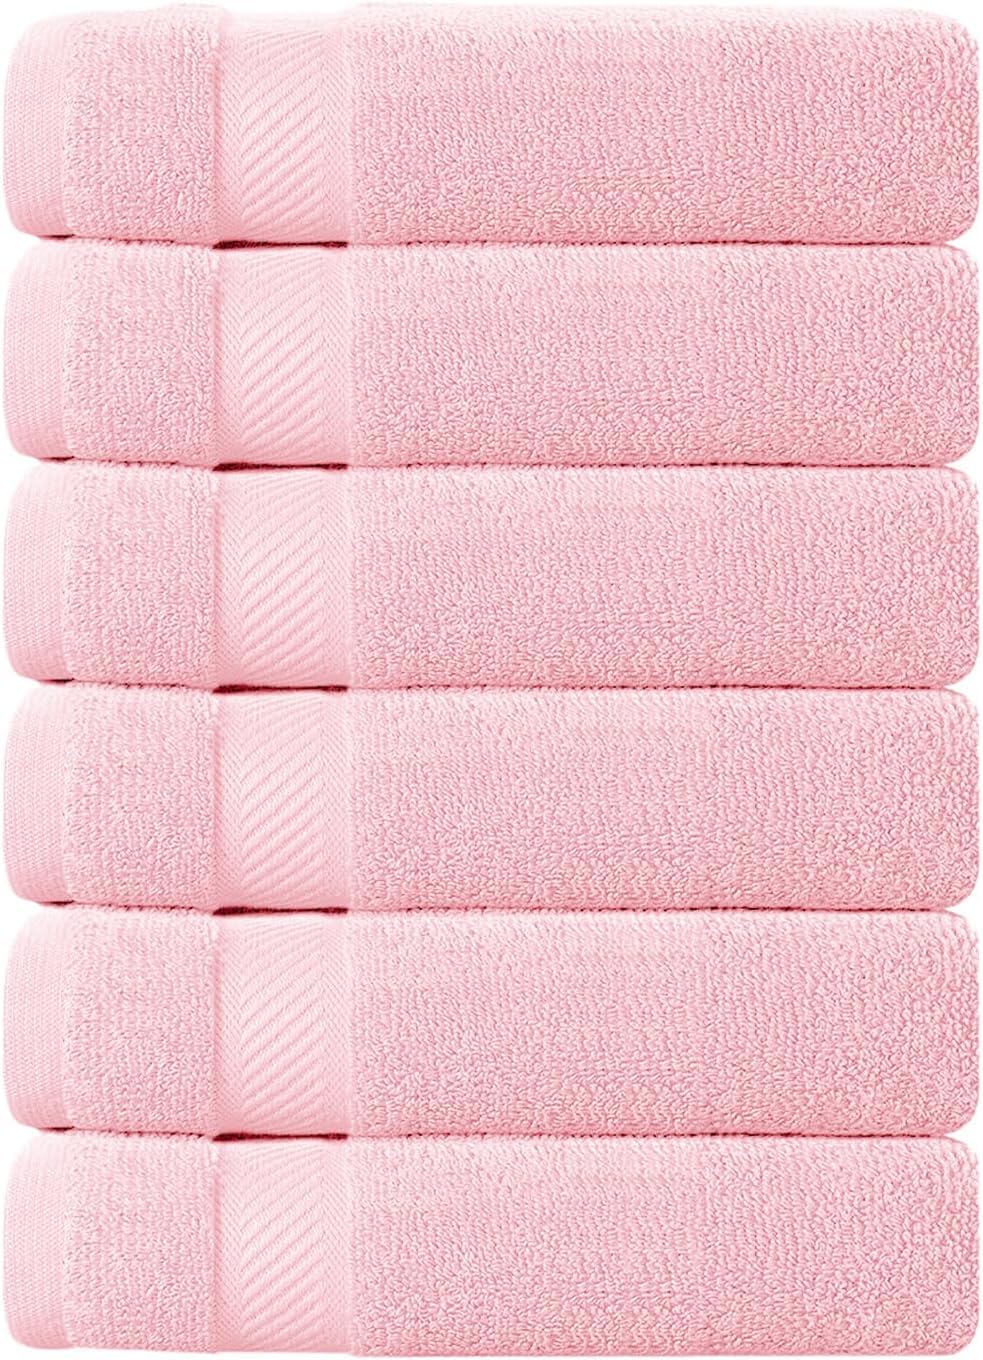 Oakias 6 Pack Small Cotton Towels Pink – 22 x 44 Inches 500 GSM – Hotel, Pool & Gym Towels – Highly Absorbent